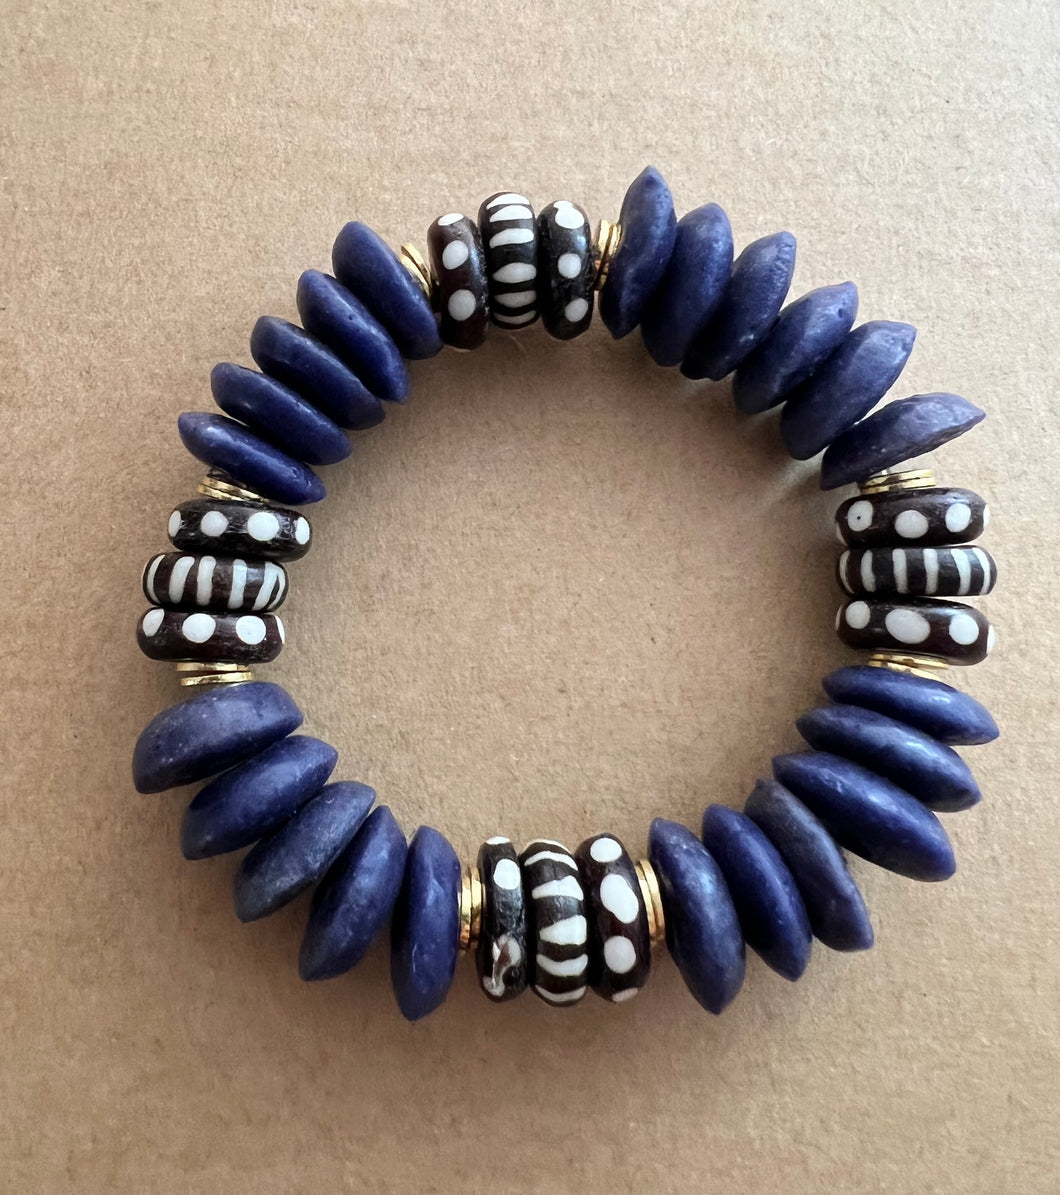 For a touch of purple in your stack this bracelet features dark purple Ashanti beads and black and white bone beads with brushed gold accents  Our bracelets are 7